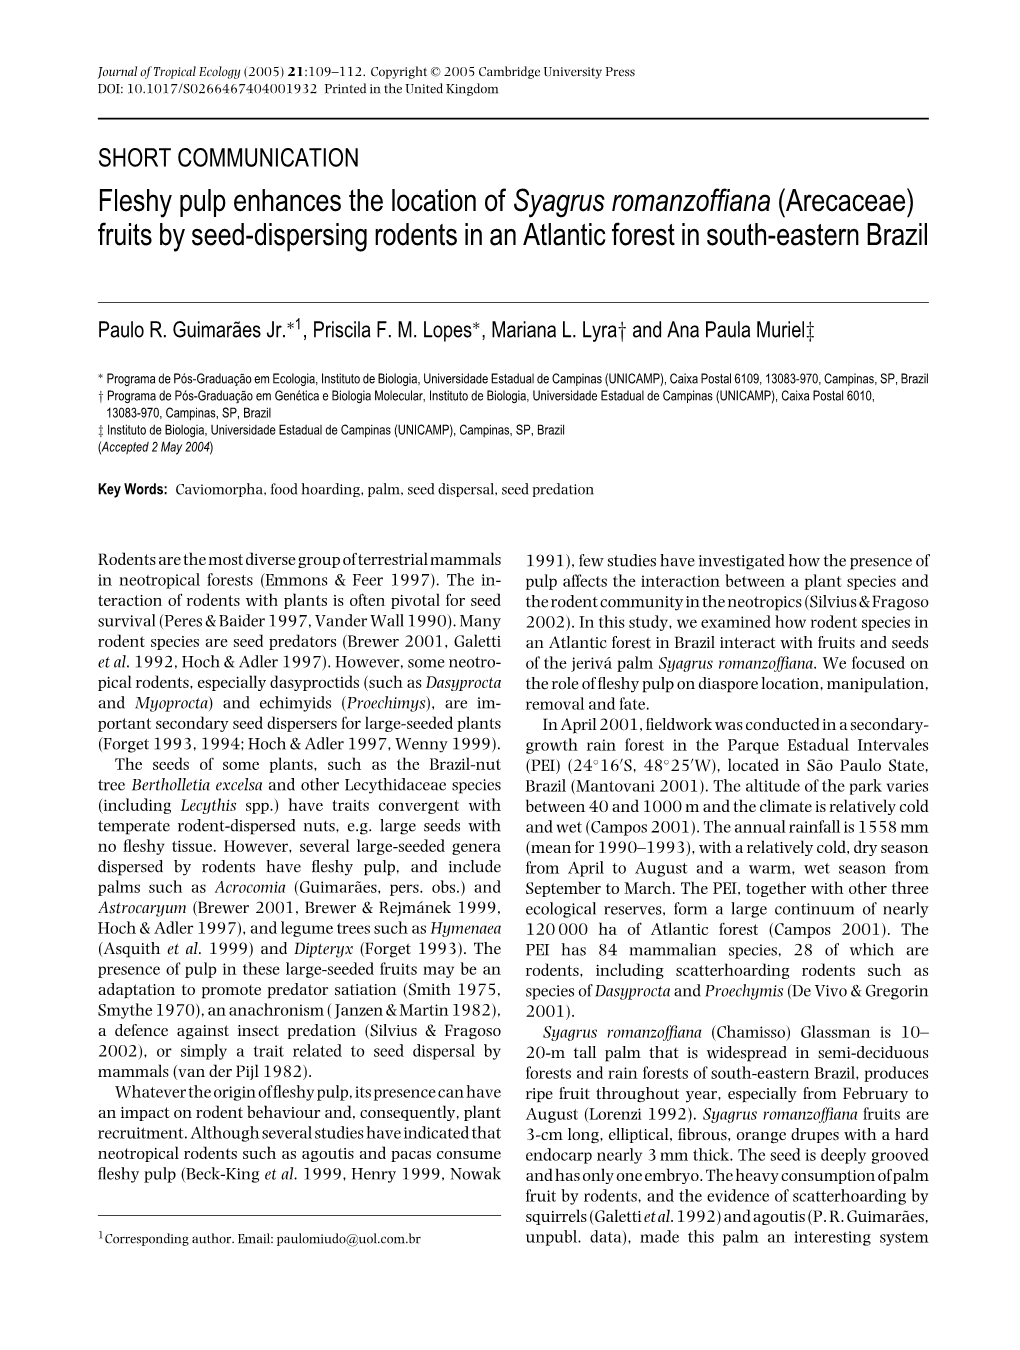 Fleshy Pulp Enhances the Location of Syagrus Romanzoffiana (Arecaceae) Fruits by Seed-Dispersing Rodents in an Atlantic Forest